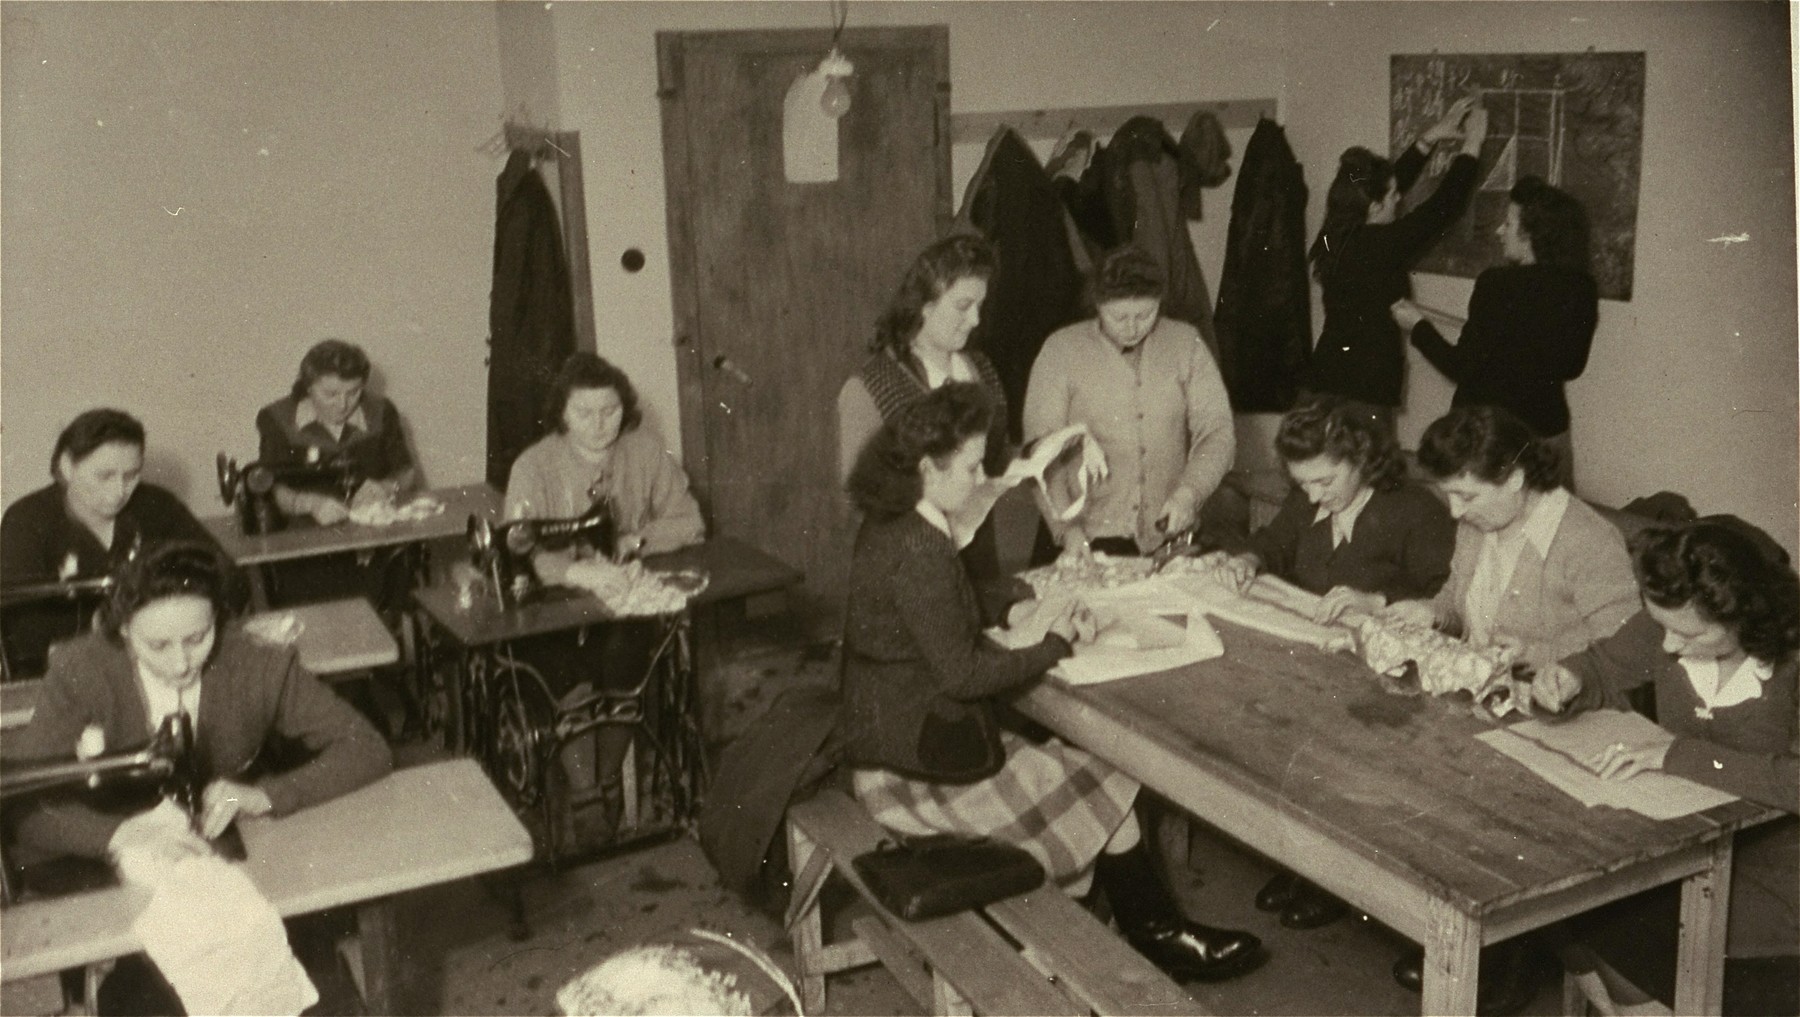 Women practice using sewing machines in an ORT sponsored sewing class in the camp.

Pictured standing at table (on the right)  is Chana Leutzner.